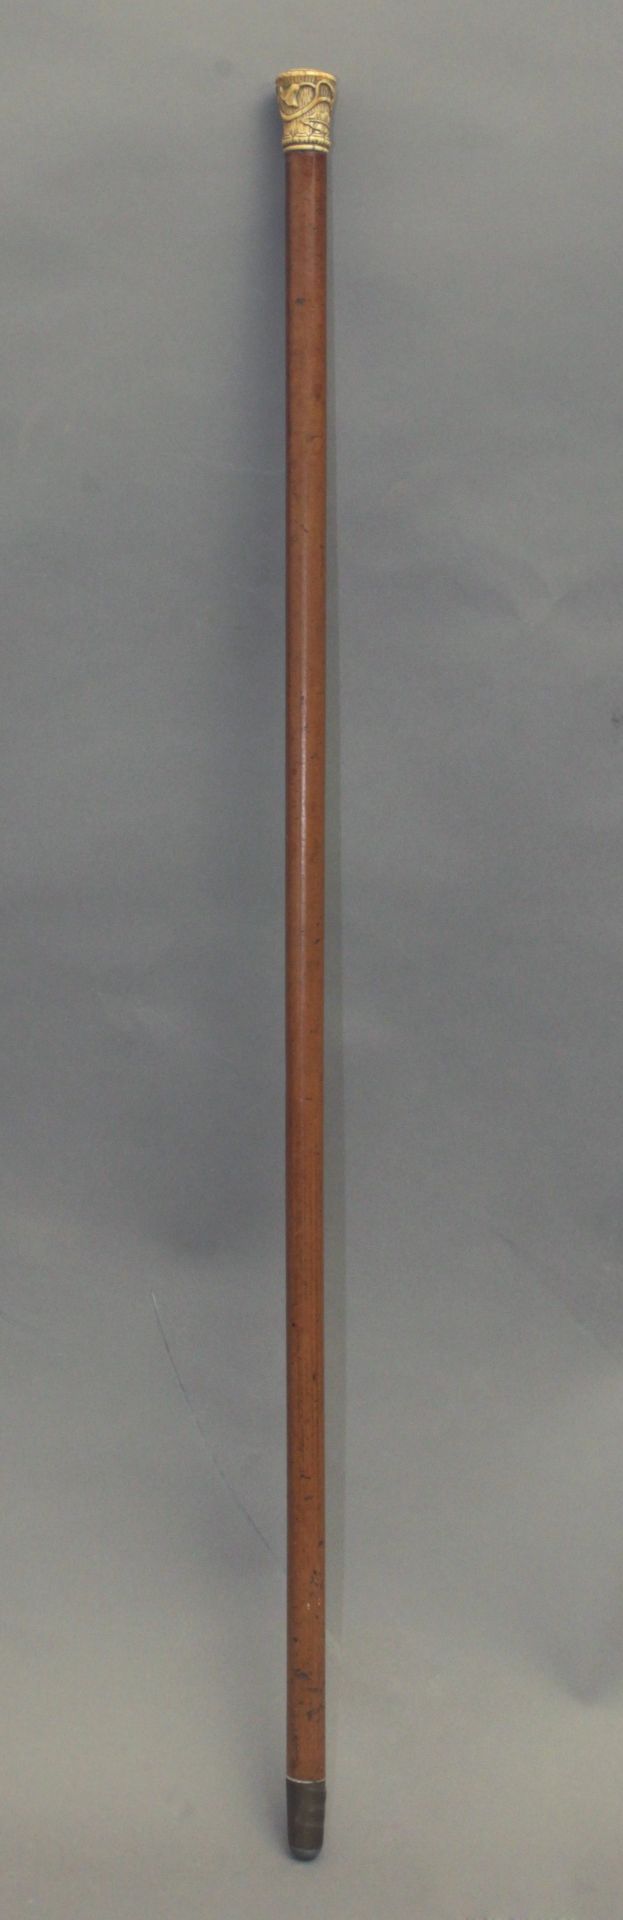 A 19th century walking stick. - Image 2 of 6